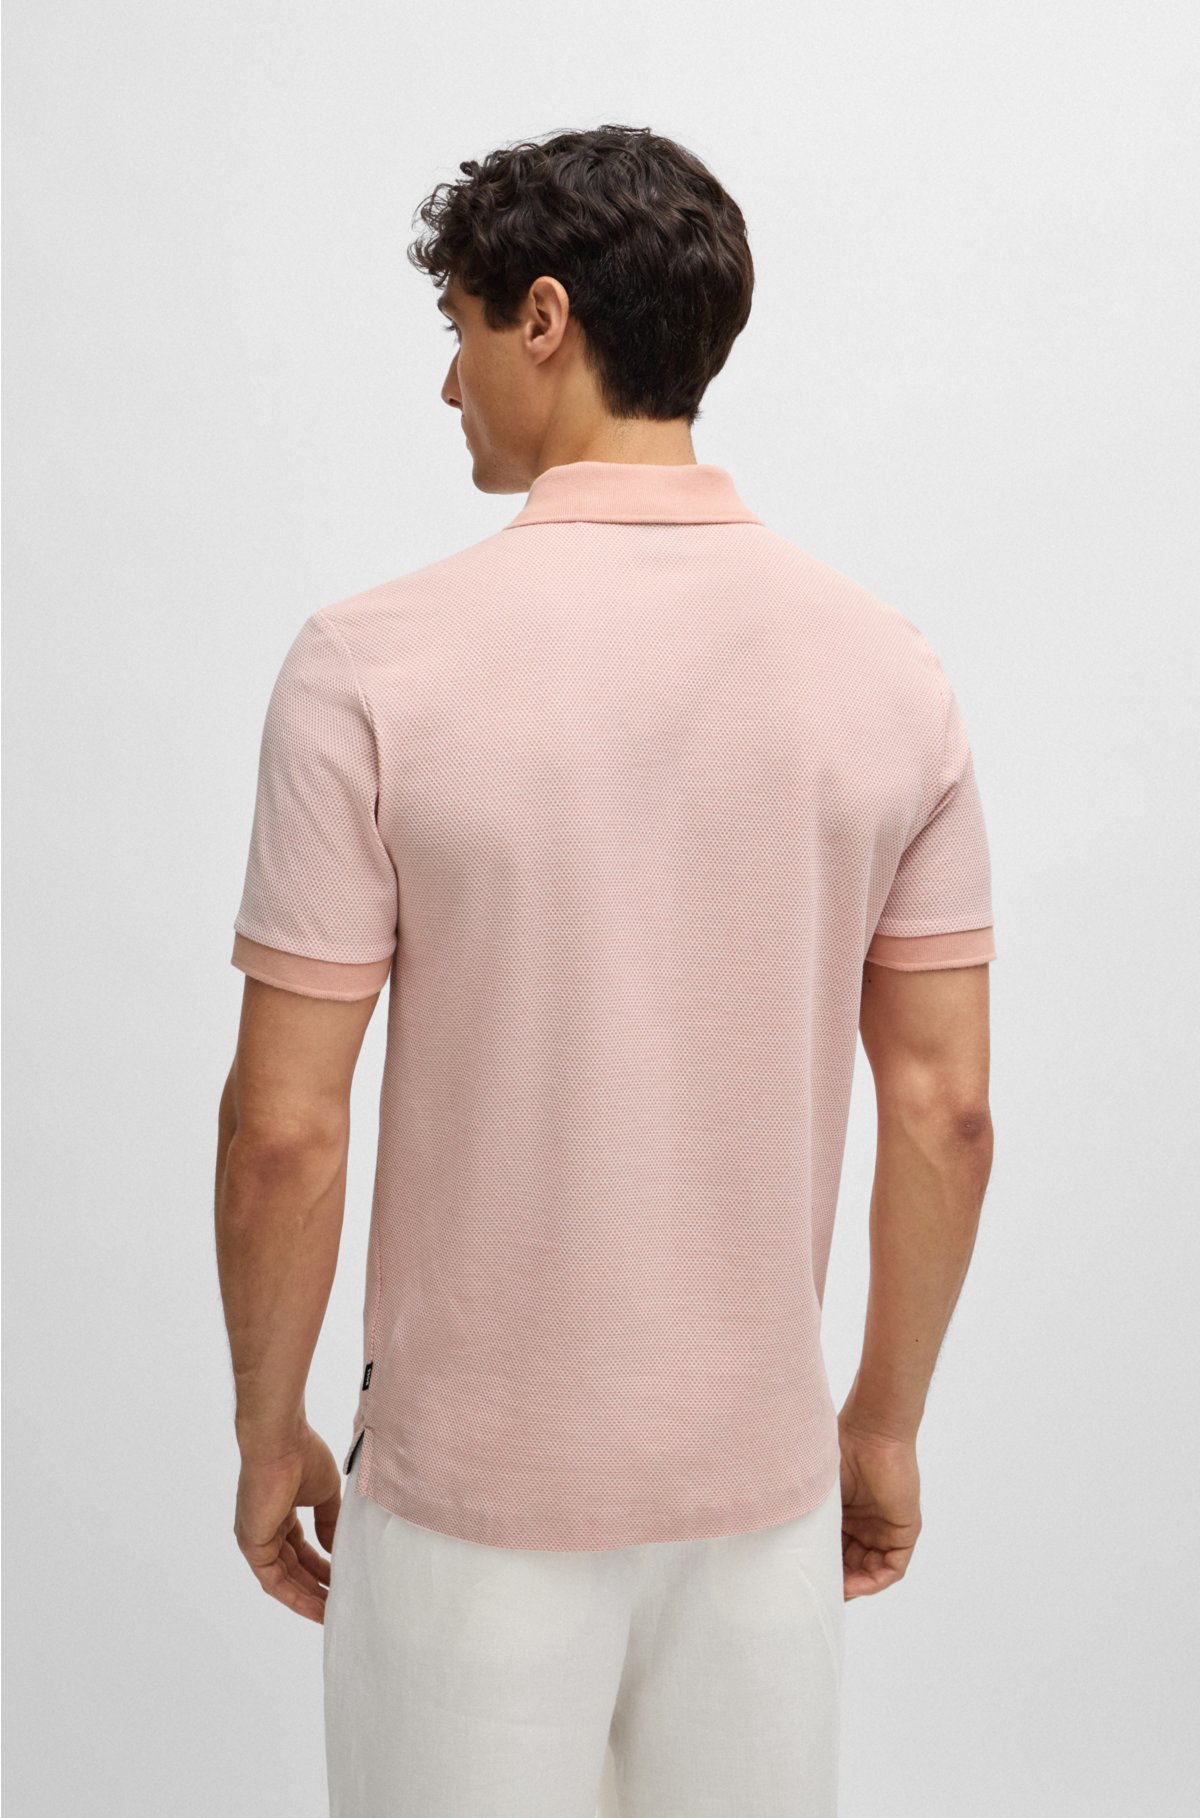 Slim-fit polo shirt in two-tone mercerised cotton, light pink